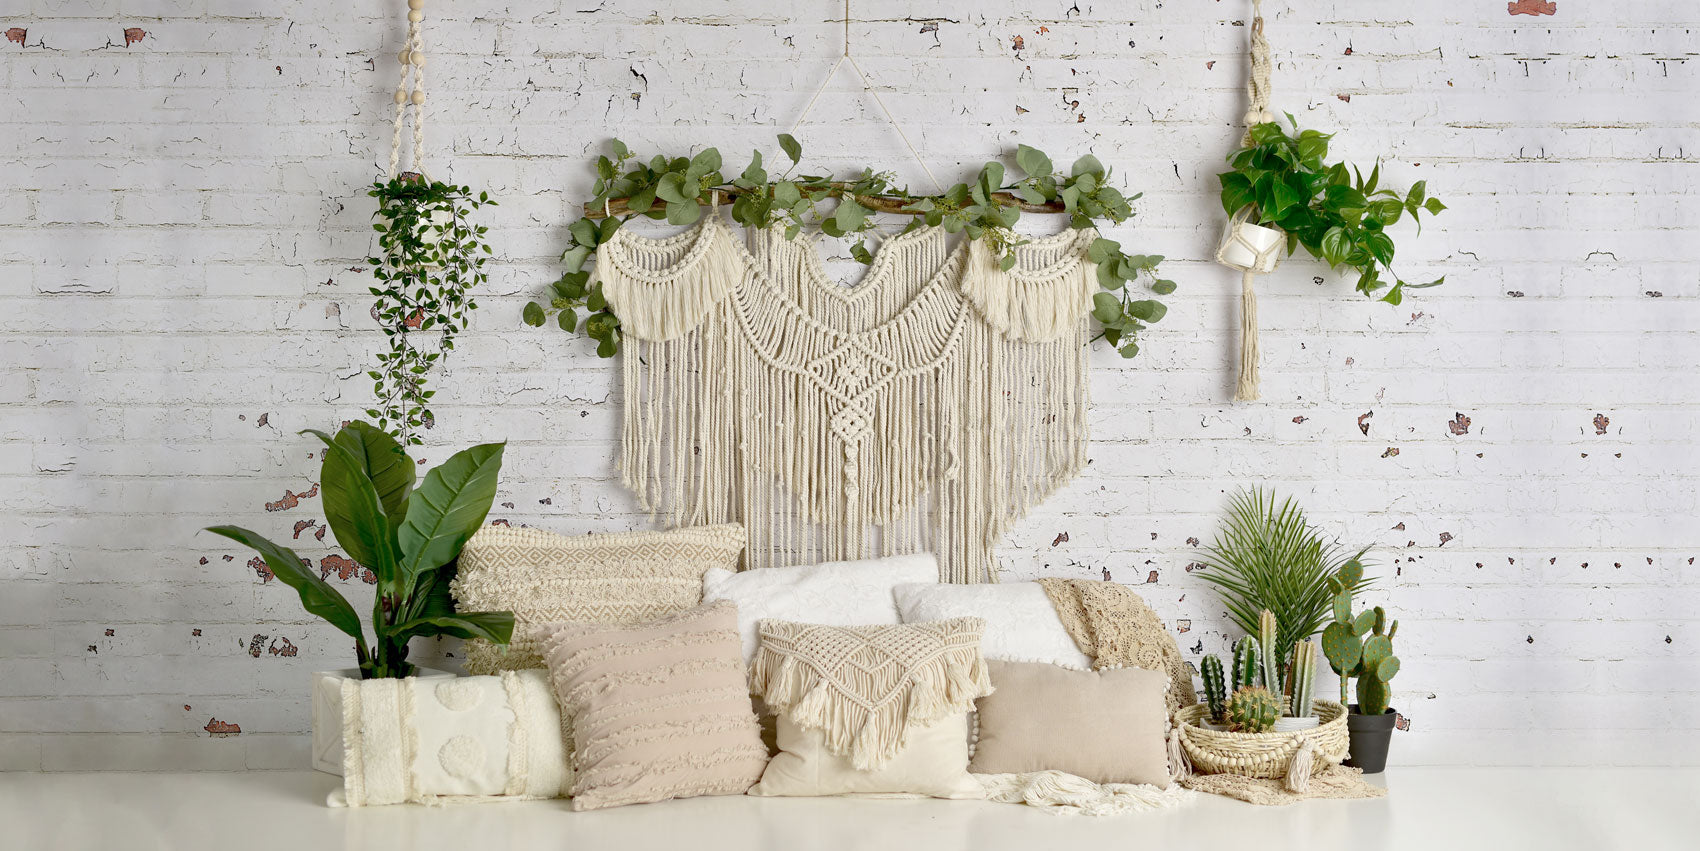 Kate Boho Macrame Floor Pillows with Plants Spring Backdrop Mother's Day Designed By Mandy Ringe Photography